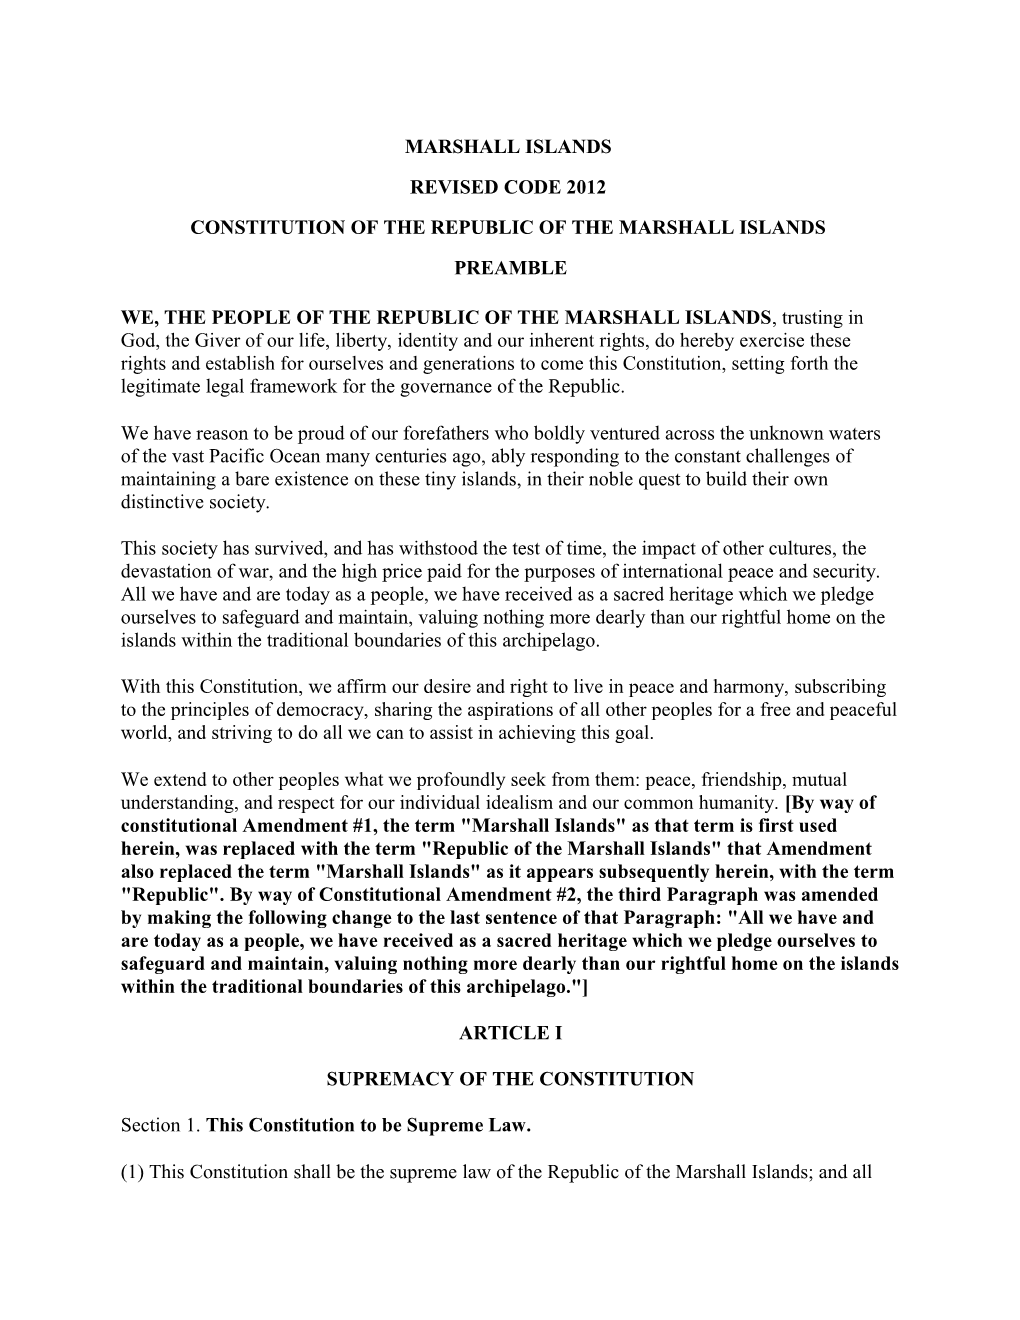 Marshall Islands Revised Code 2012 Constitution of the Republic of the Marshall Islands